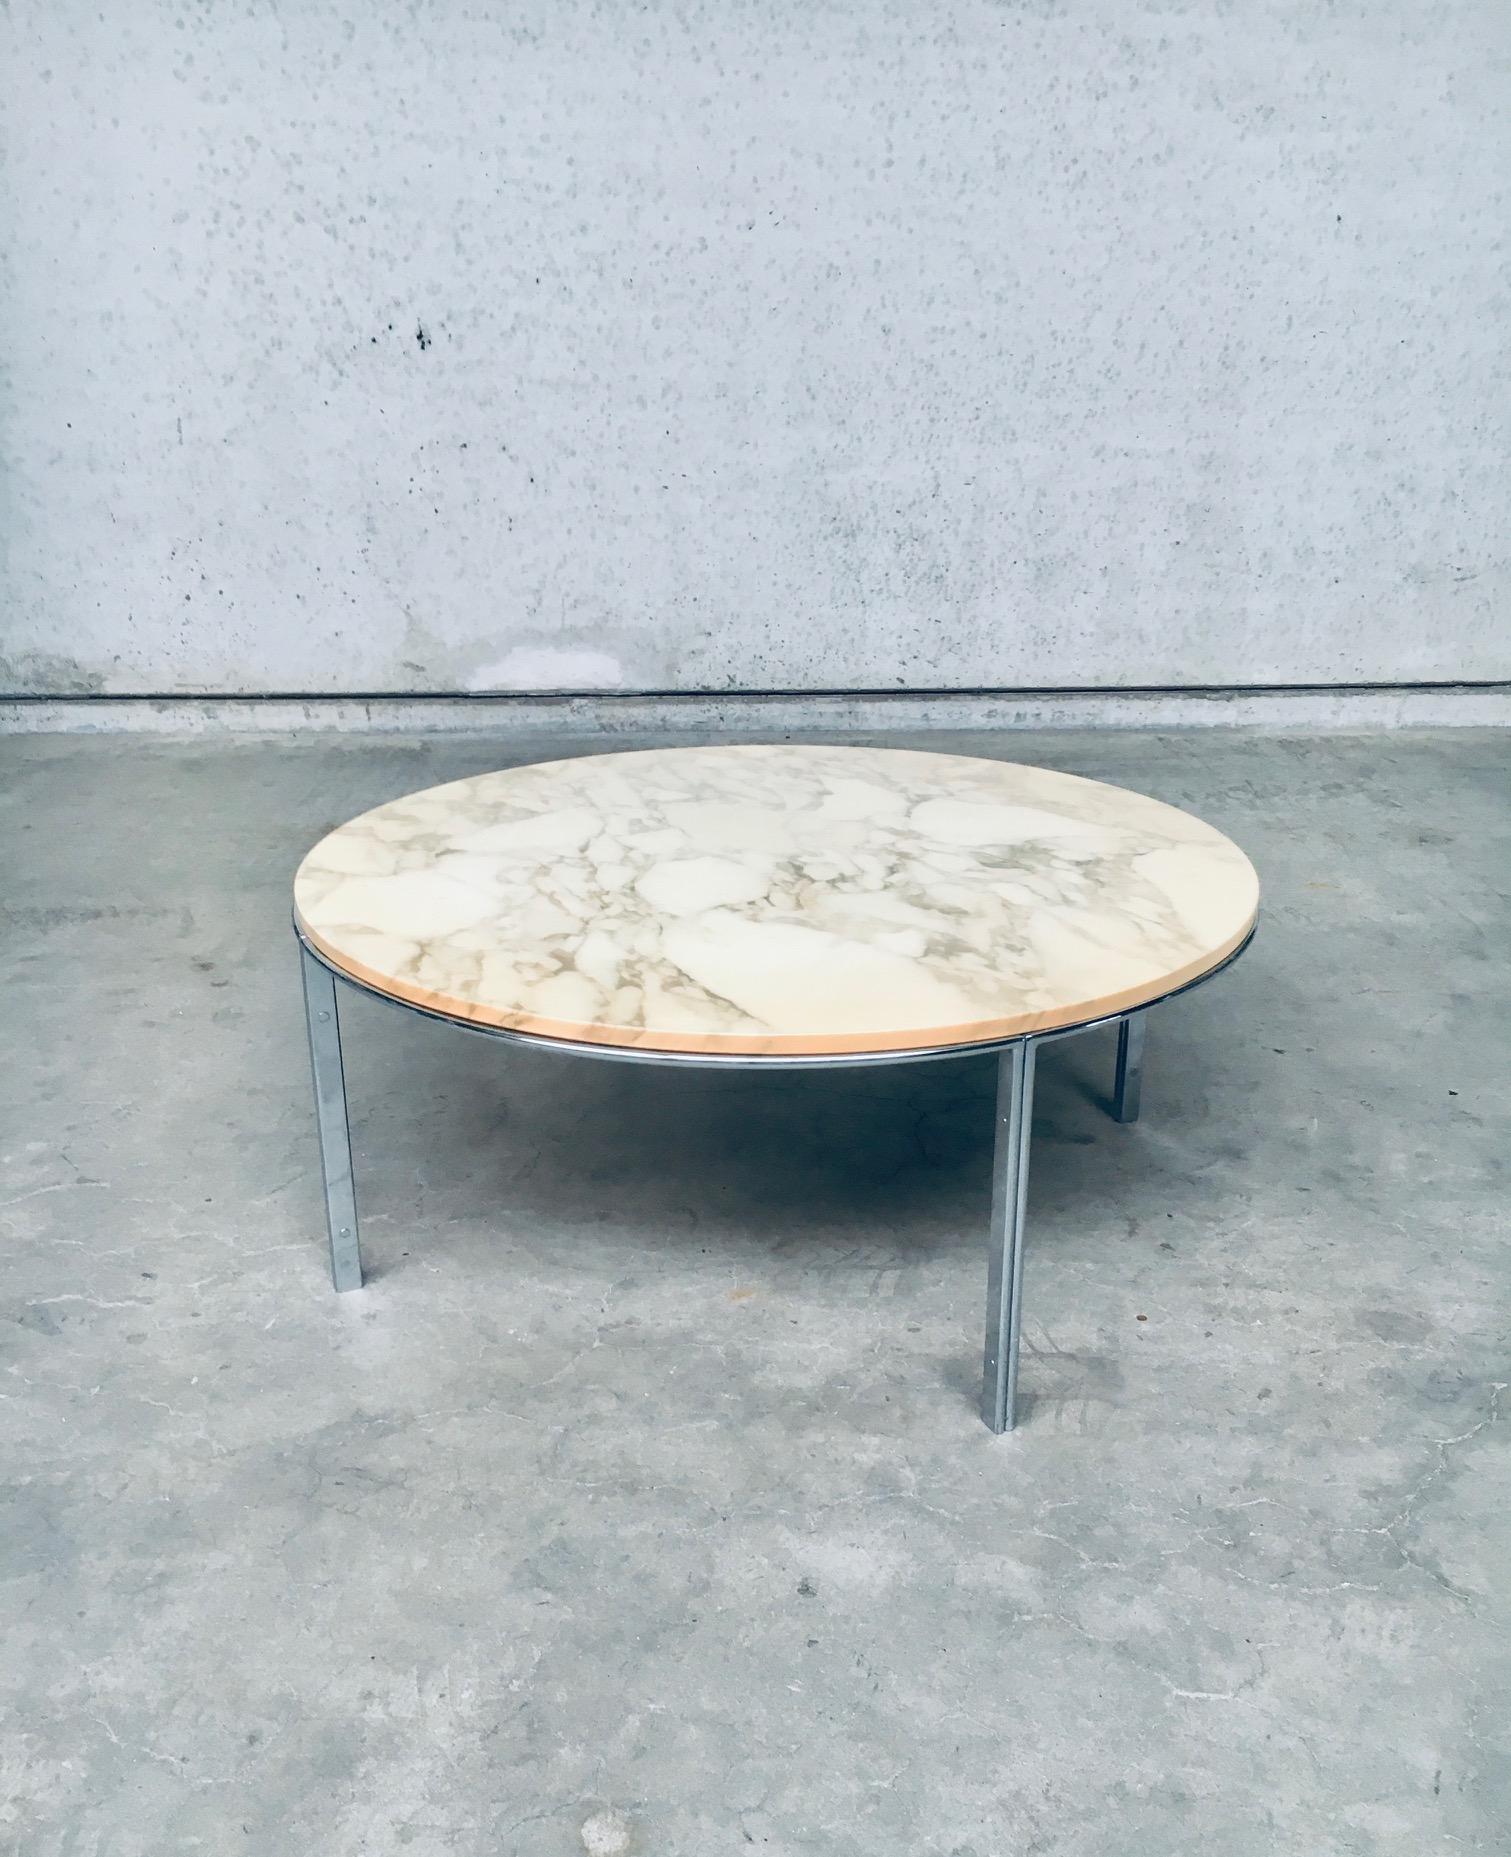 Vintage Mid-Century Modern Italian Design Marble Coffee Table. Made in Italy, 1960s / 70s. Round marble top on chrome metal base. Very nice yellowish carrara marble top on chromed folded steel 4 legged base. Very nice sleek good proportioned design.